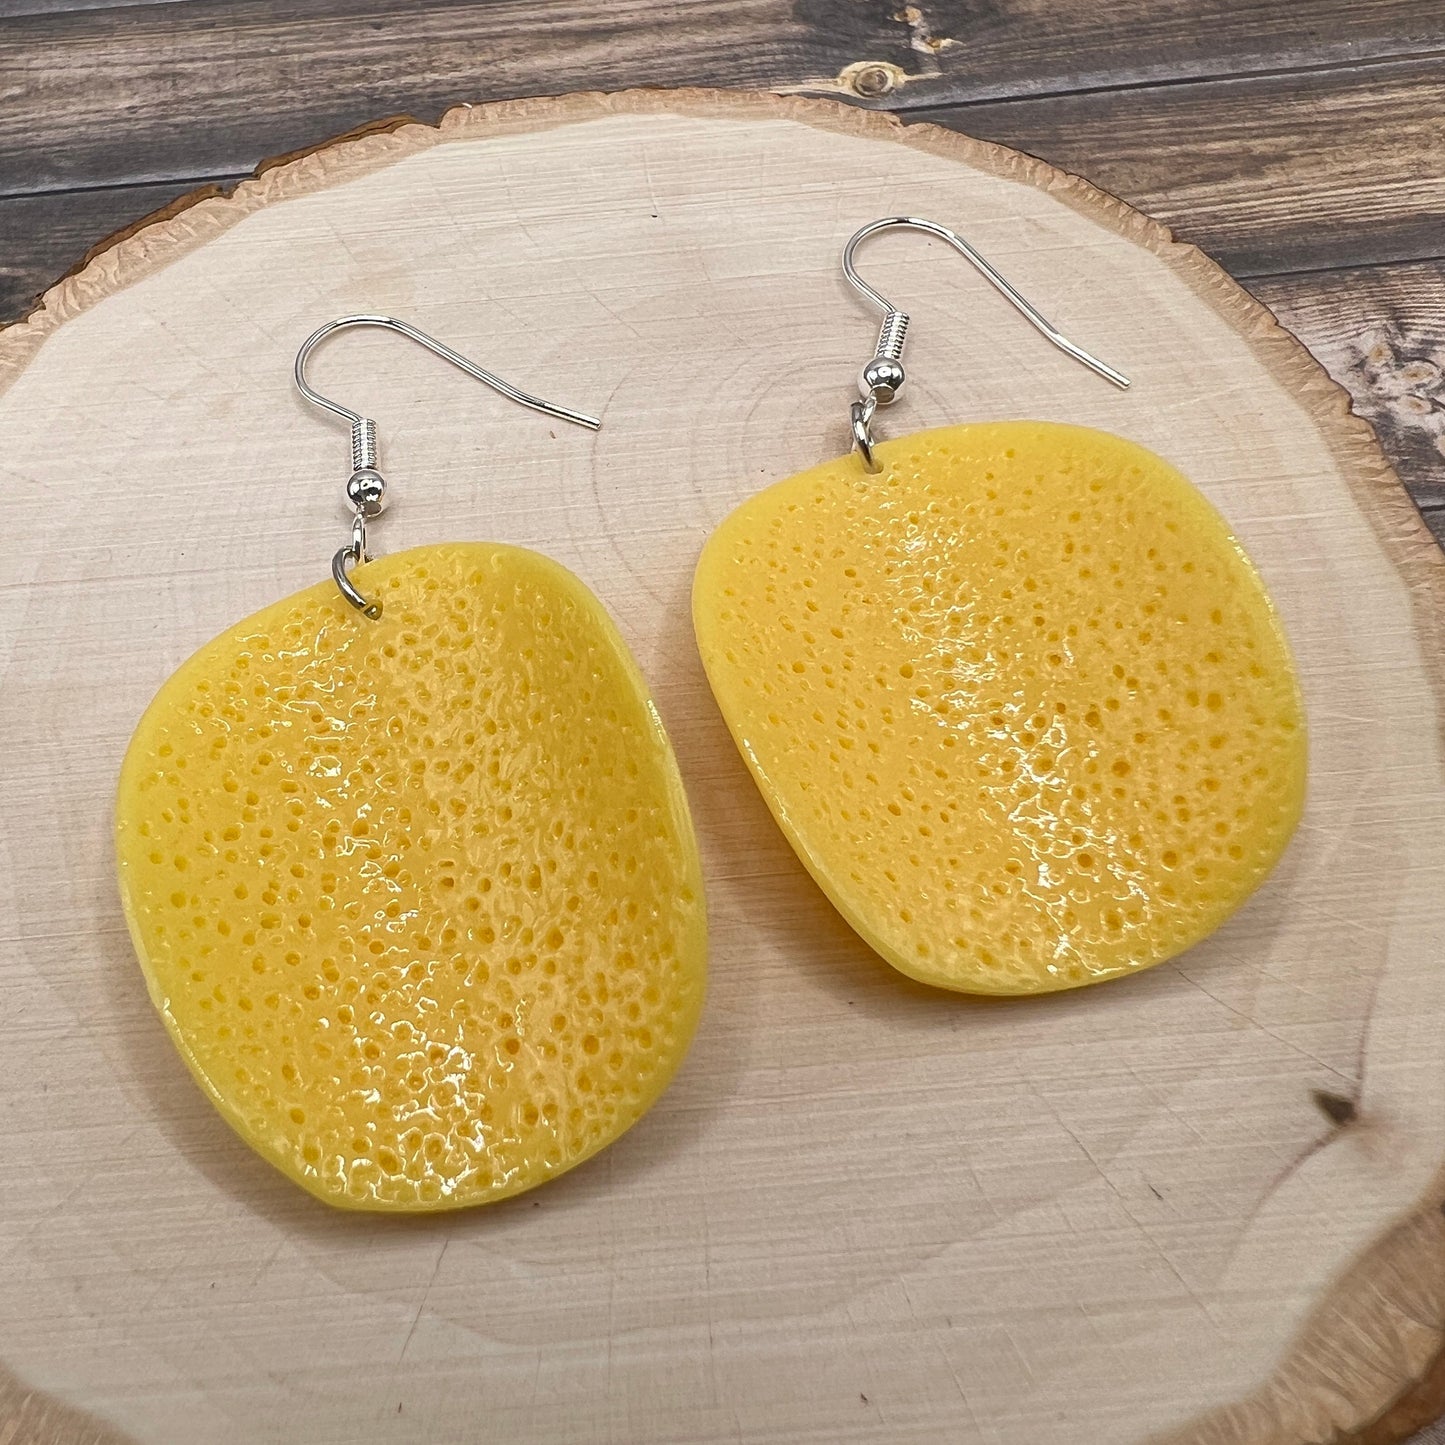 Potato Chip Crisps Junk Food Novelty Snack Earrings, Hypoallergenic Resin Food Fun Quirky